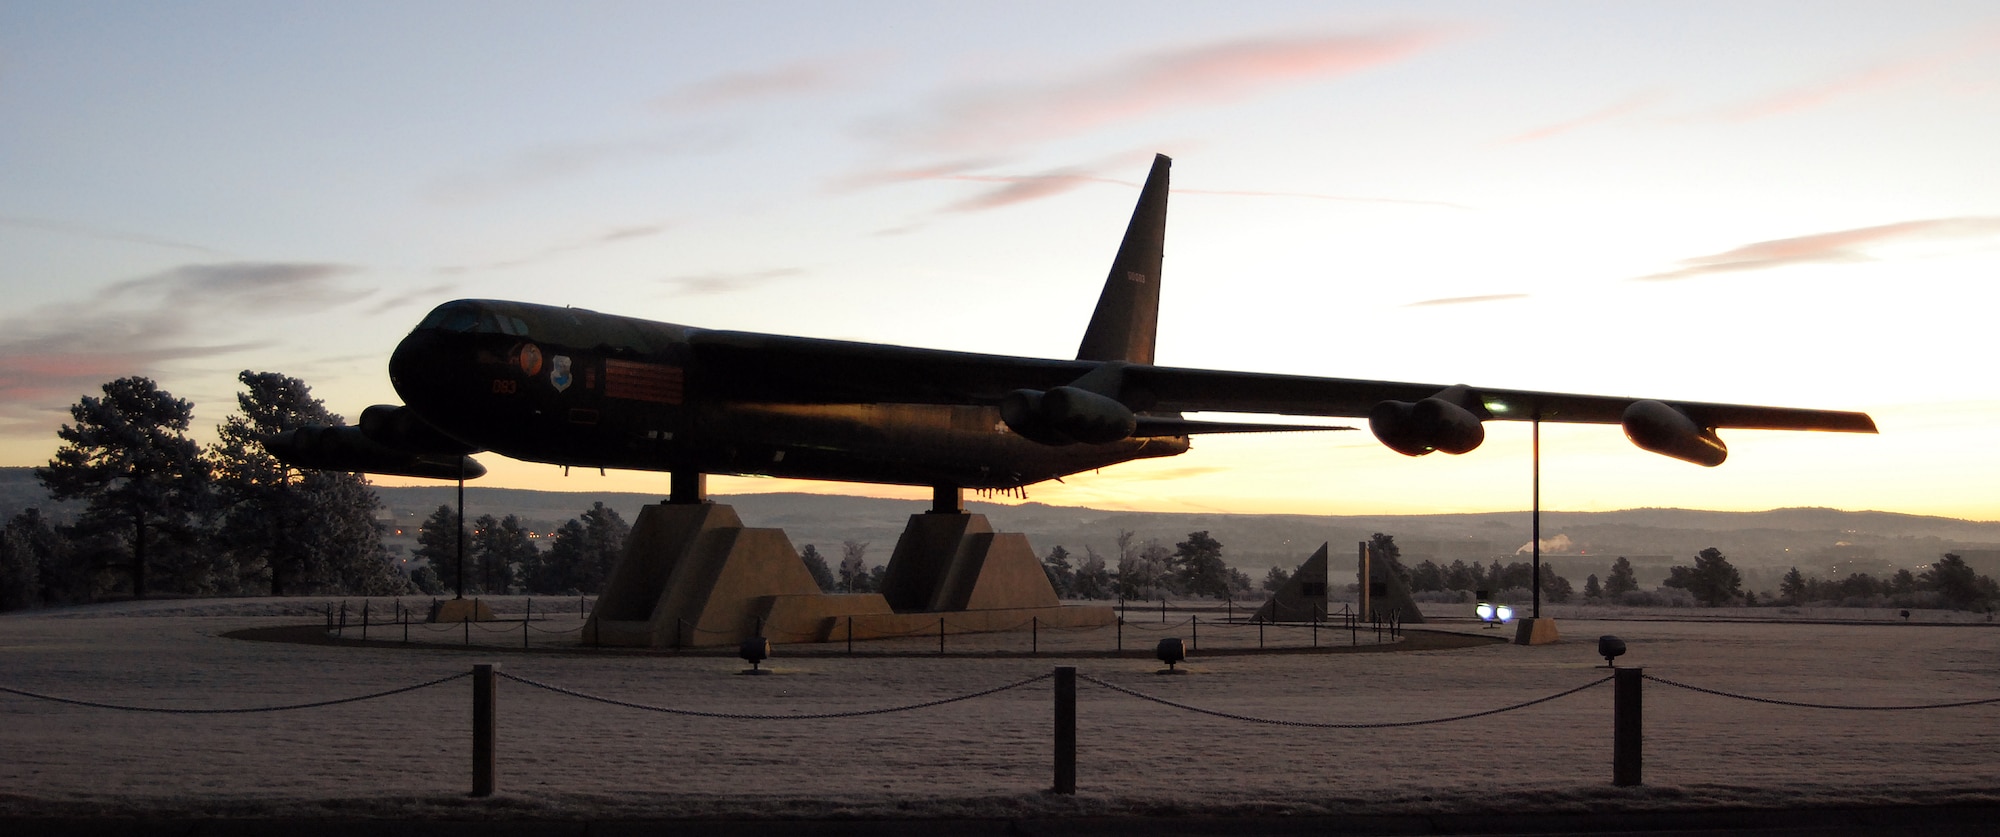 The B-52 Stratofortress known as "Diamond Lil" sits near the north entrance of the Air Force Academy in Colorado Springs, Colo., Dec. 23, 2010. Diamond Lil's tail gunner, Airman 1st Class Albert Moore, shot down a North Vietnamese MiG on Dec. 24, 1972. Diamond Lil came to the Academy after it was decommissioned in 1983. (U.S. Air Force photo/Staff Sgt. Don Branum)